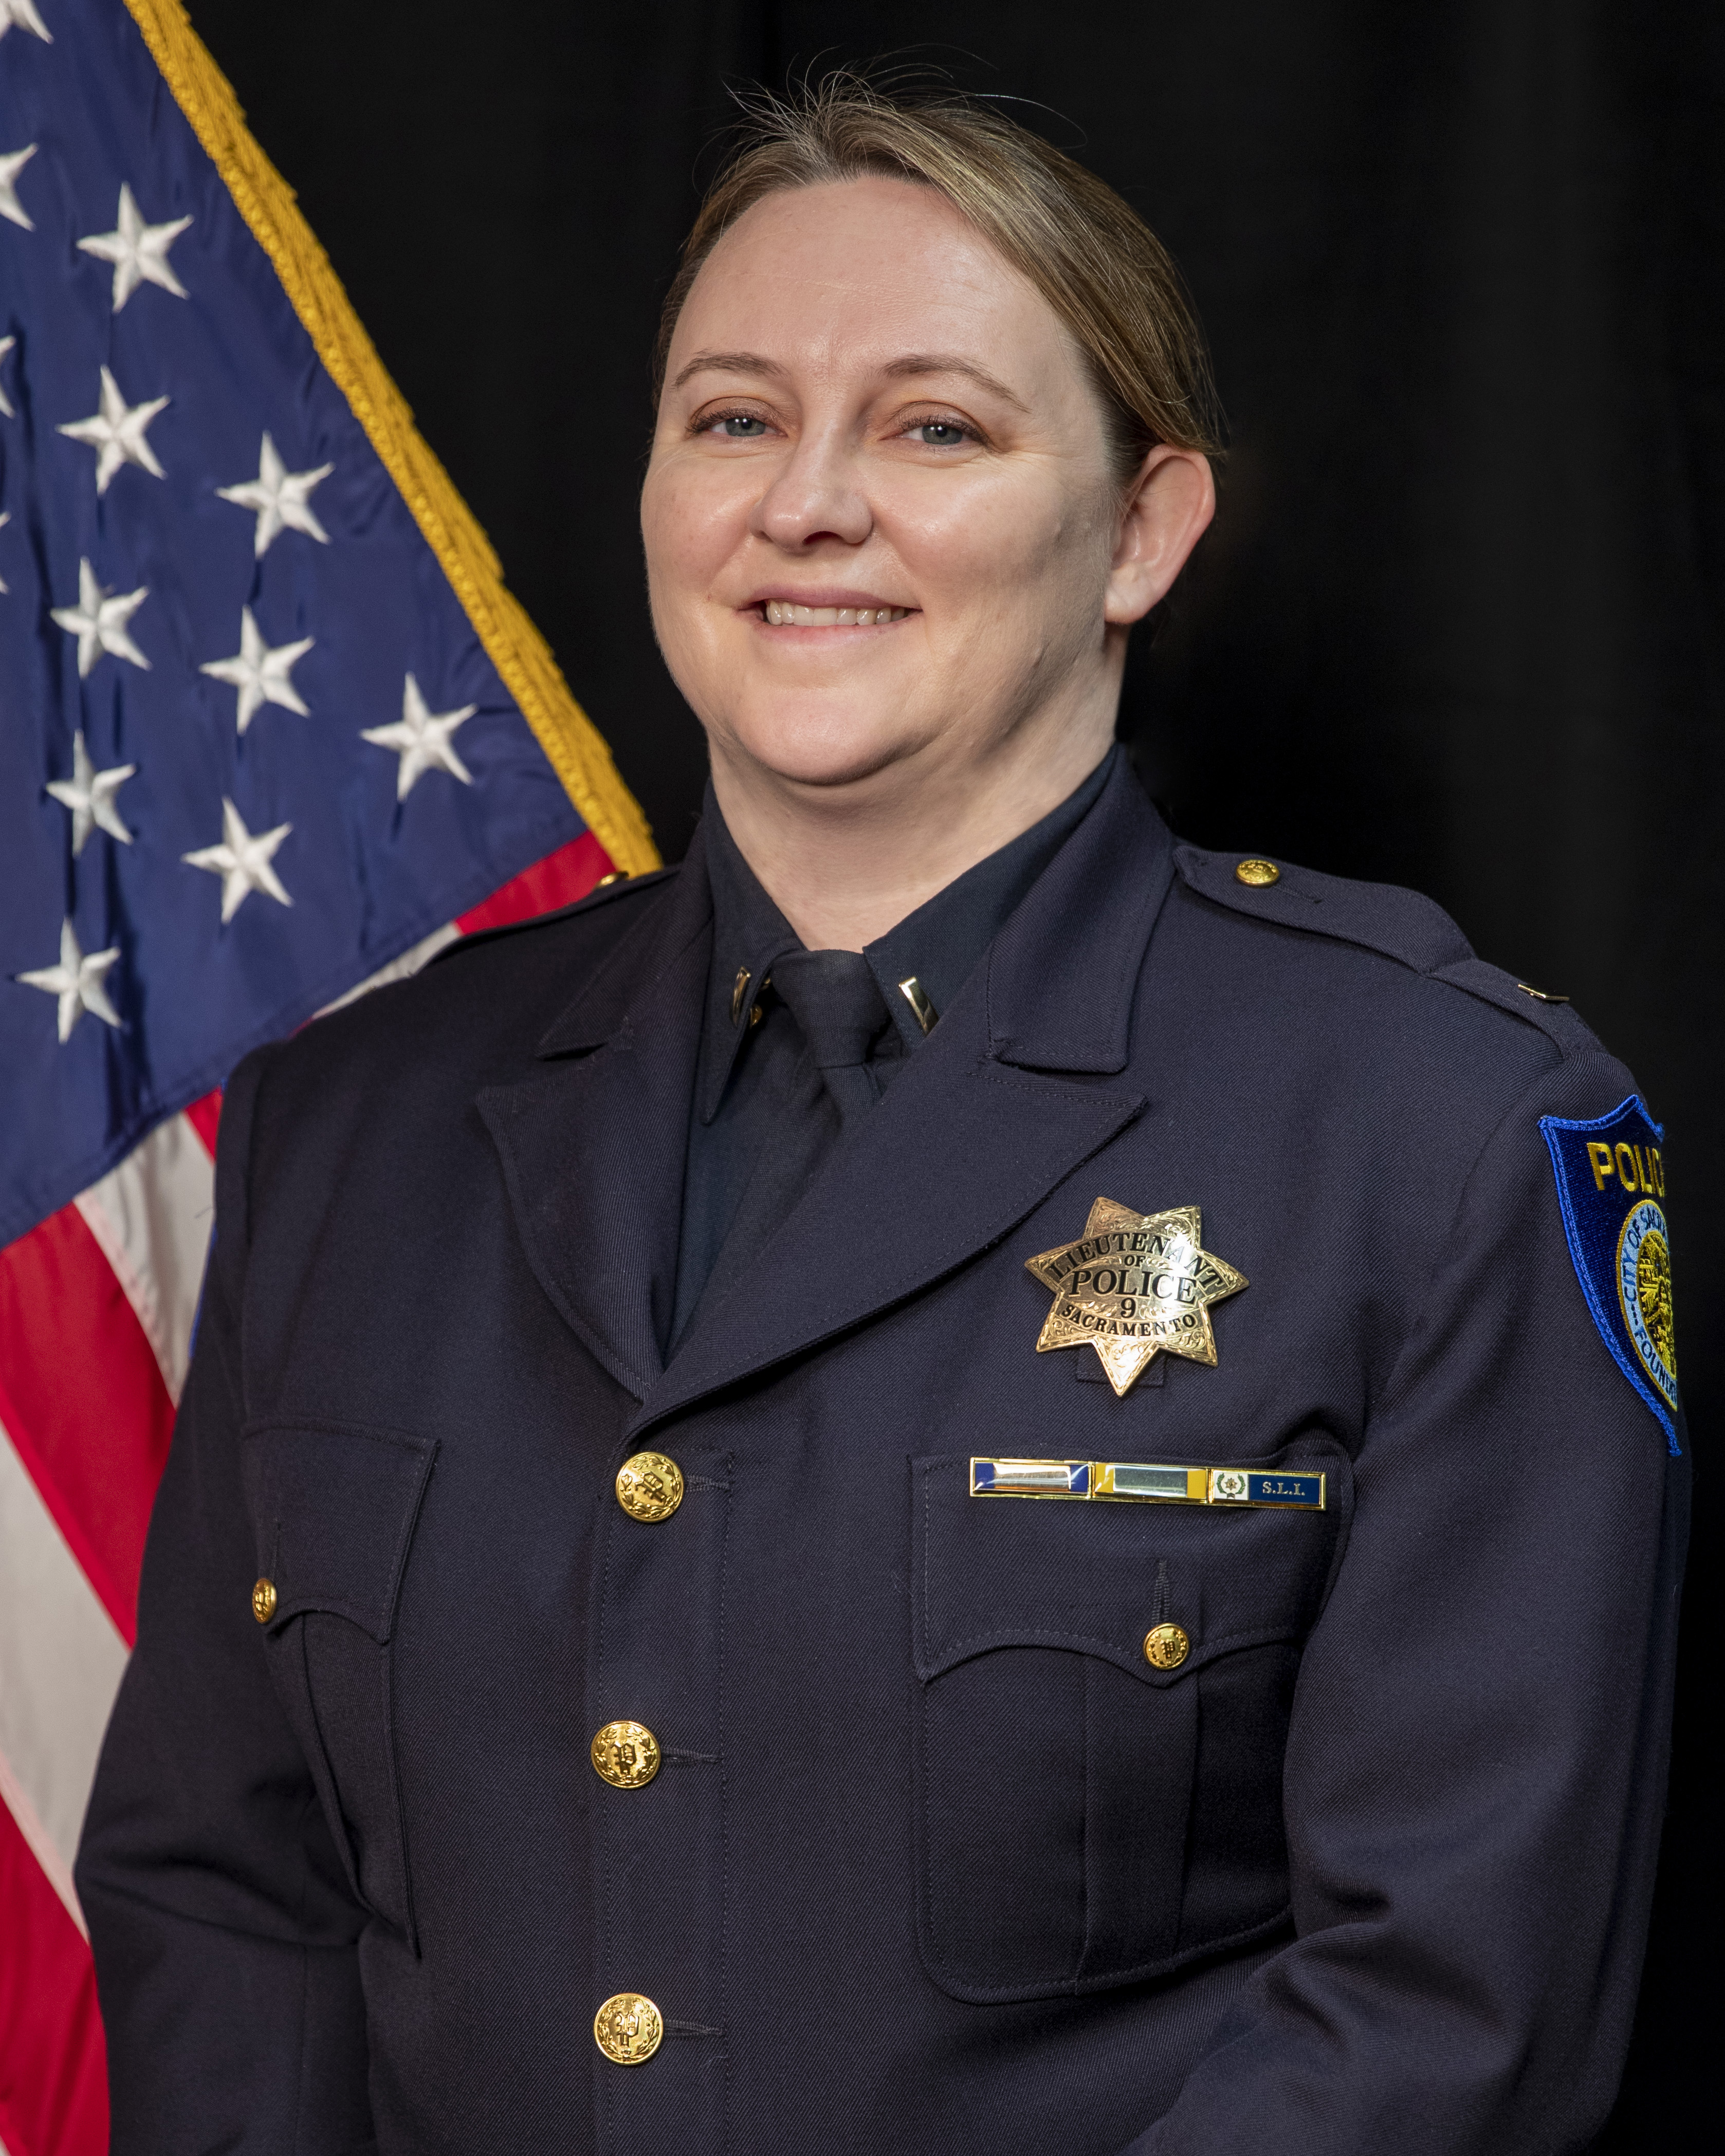 Photo of Kristine Morse in uniform standing in front of the American flag.